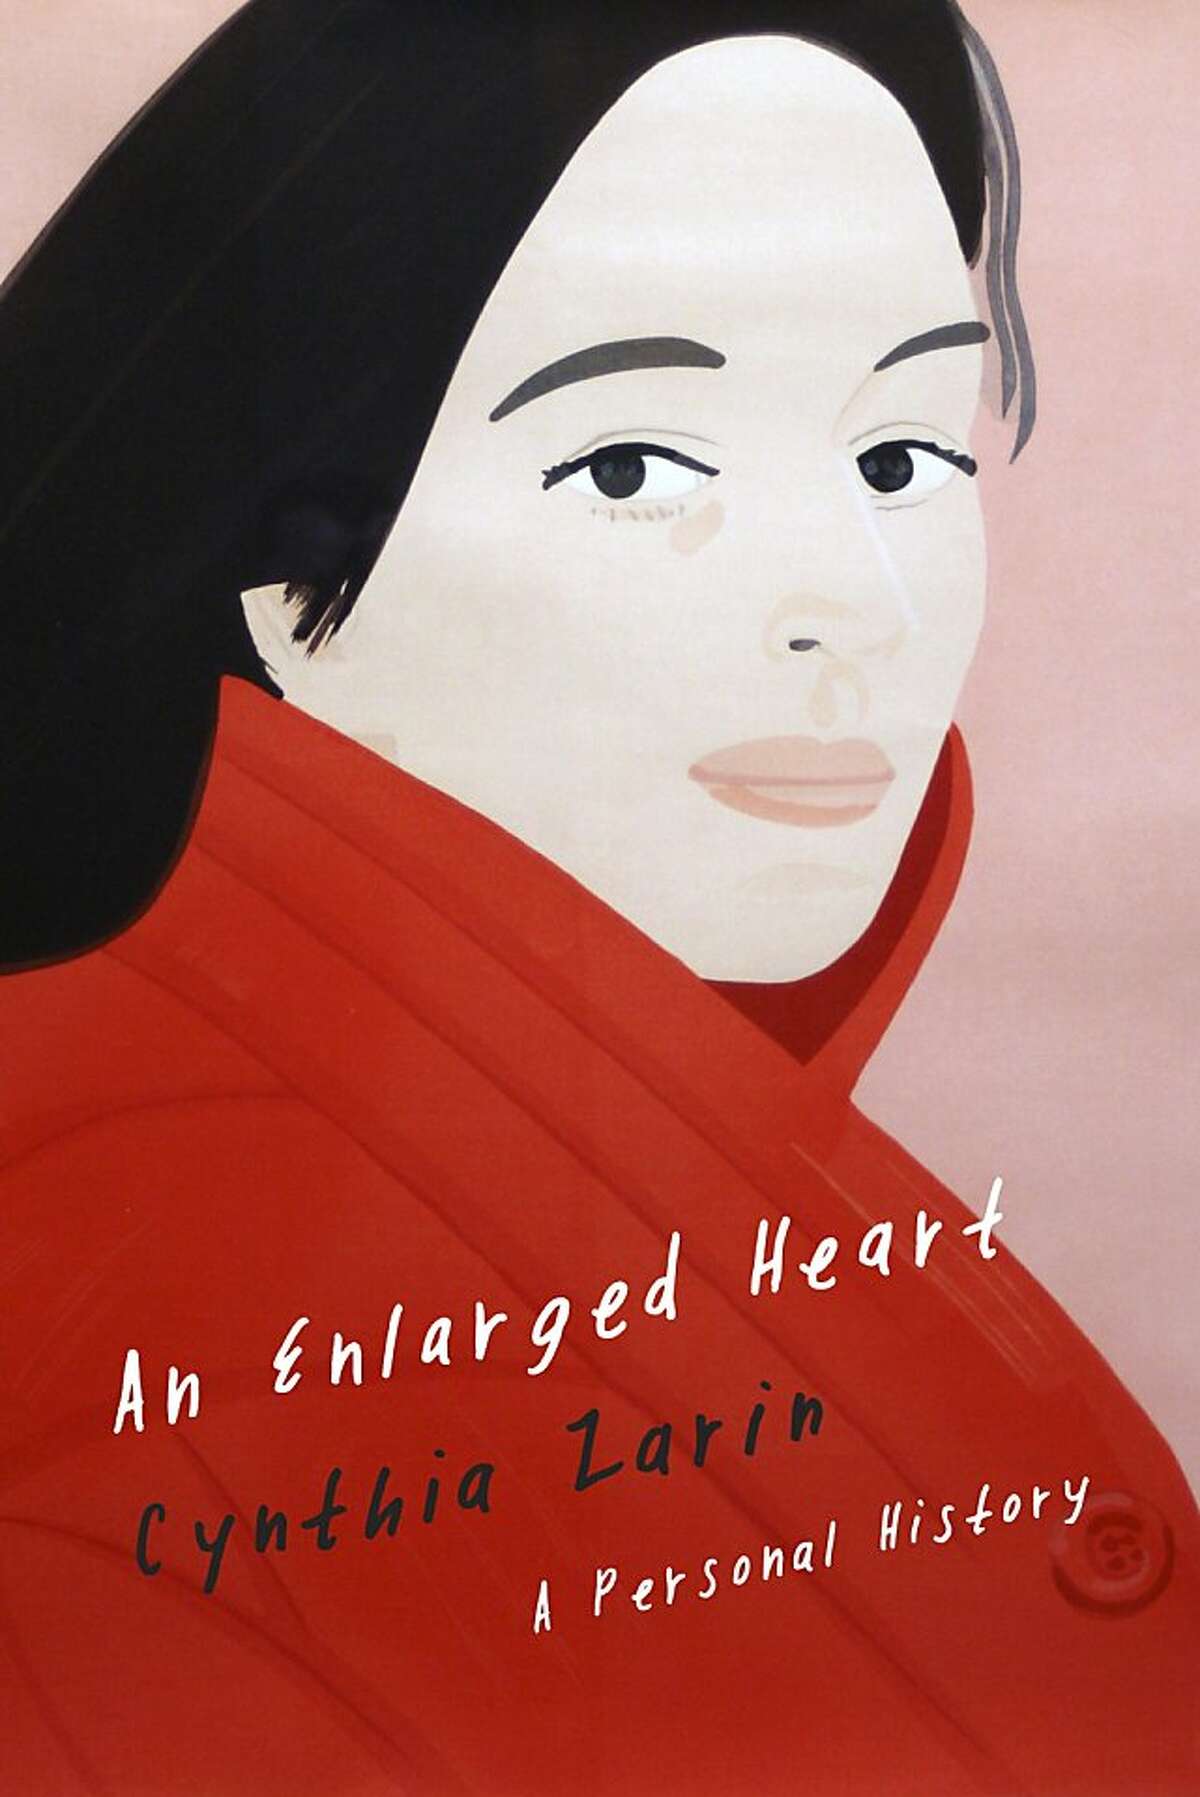 An Enlarged Heart: A Personal History, by Cynthia Zarin